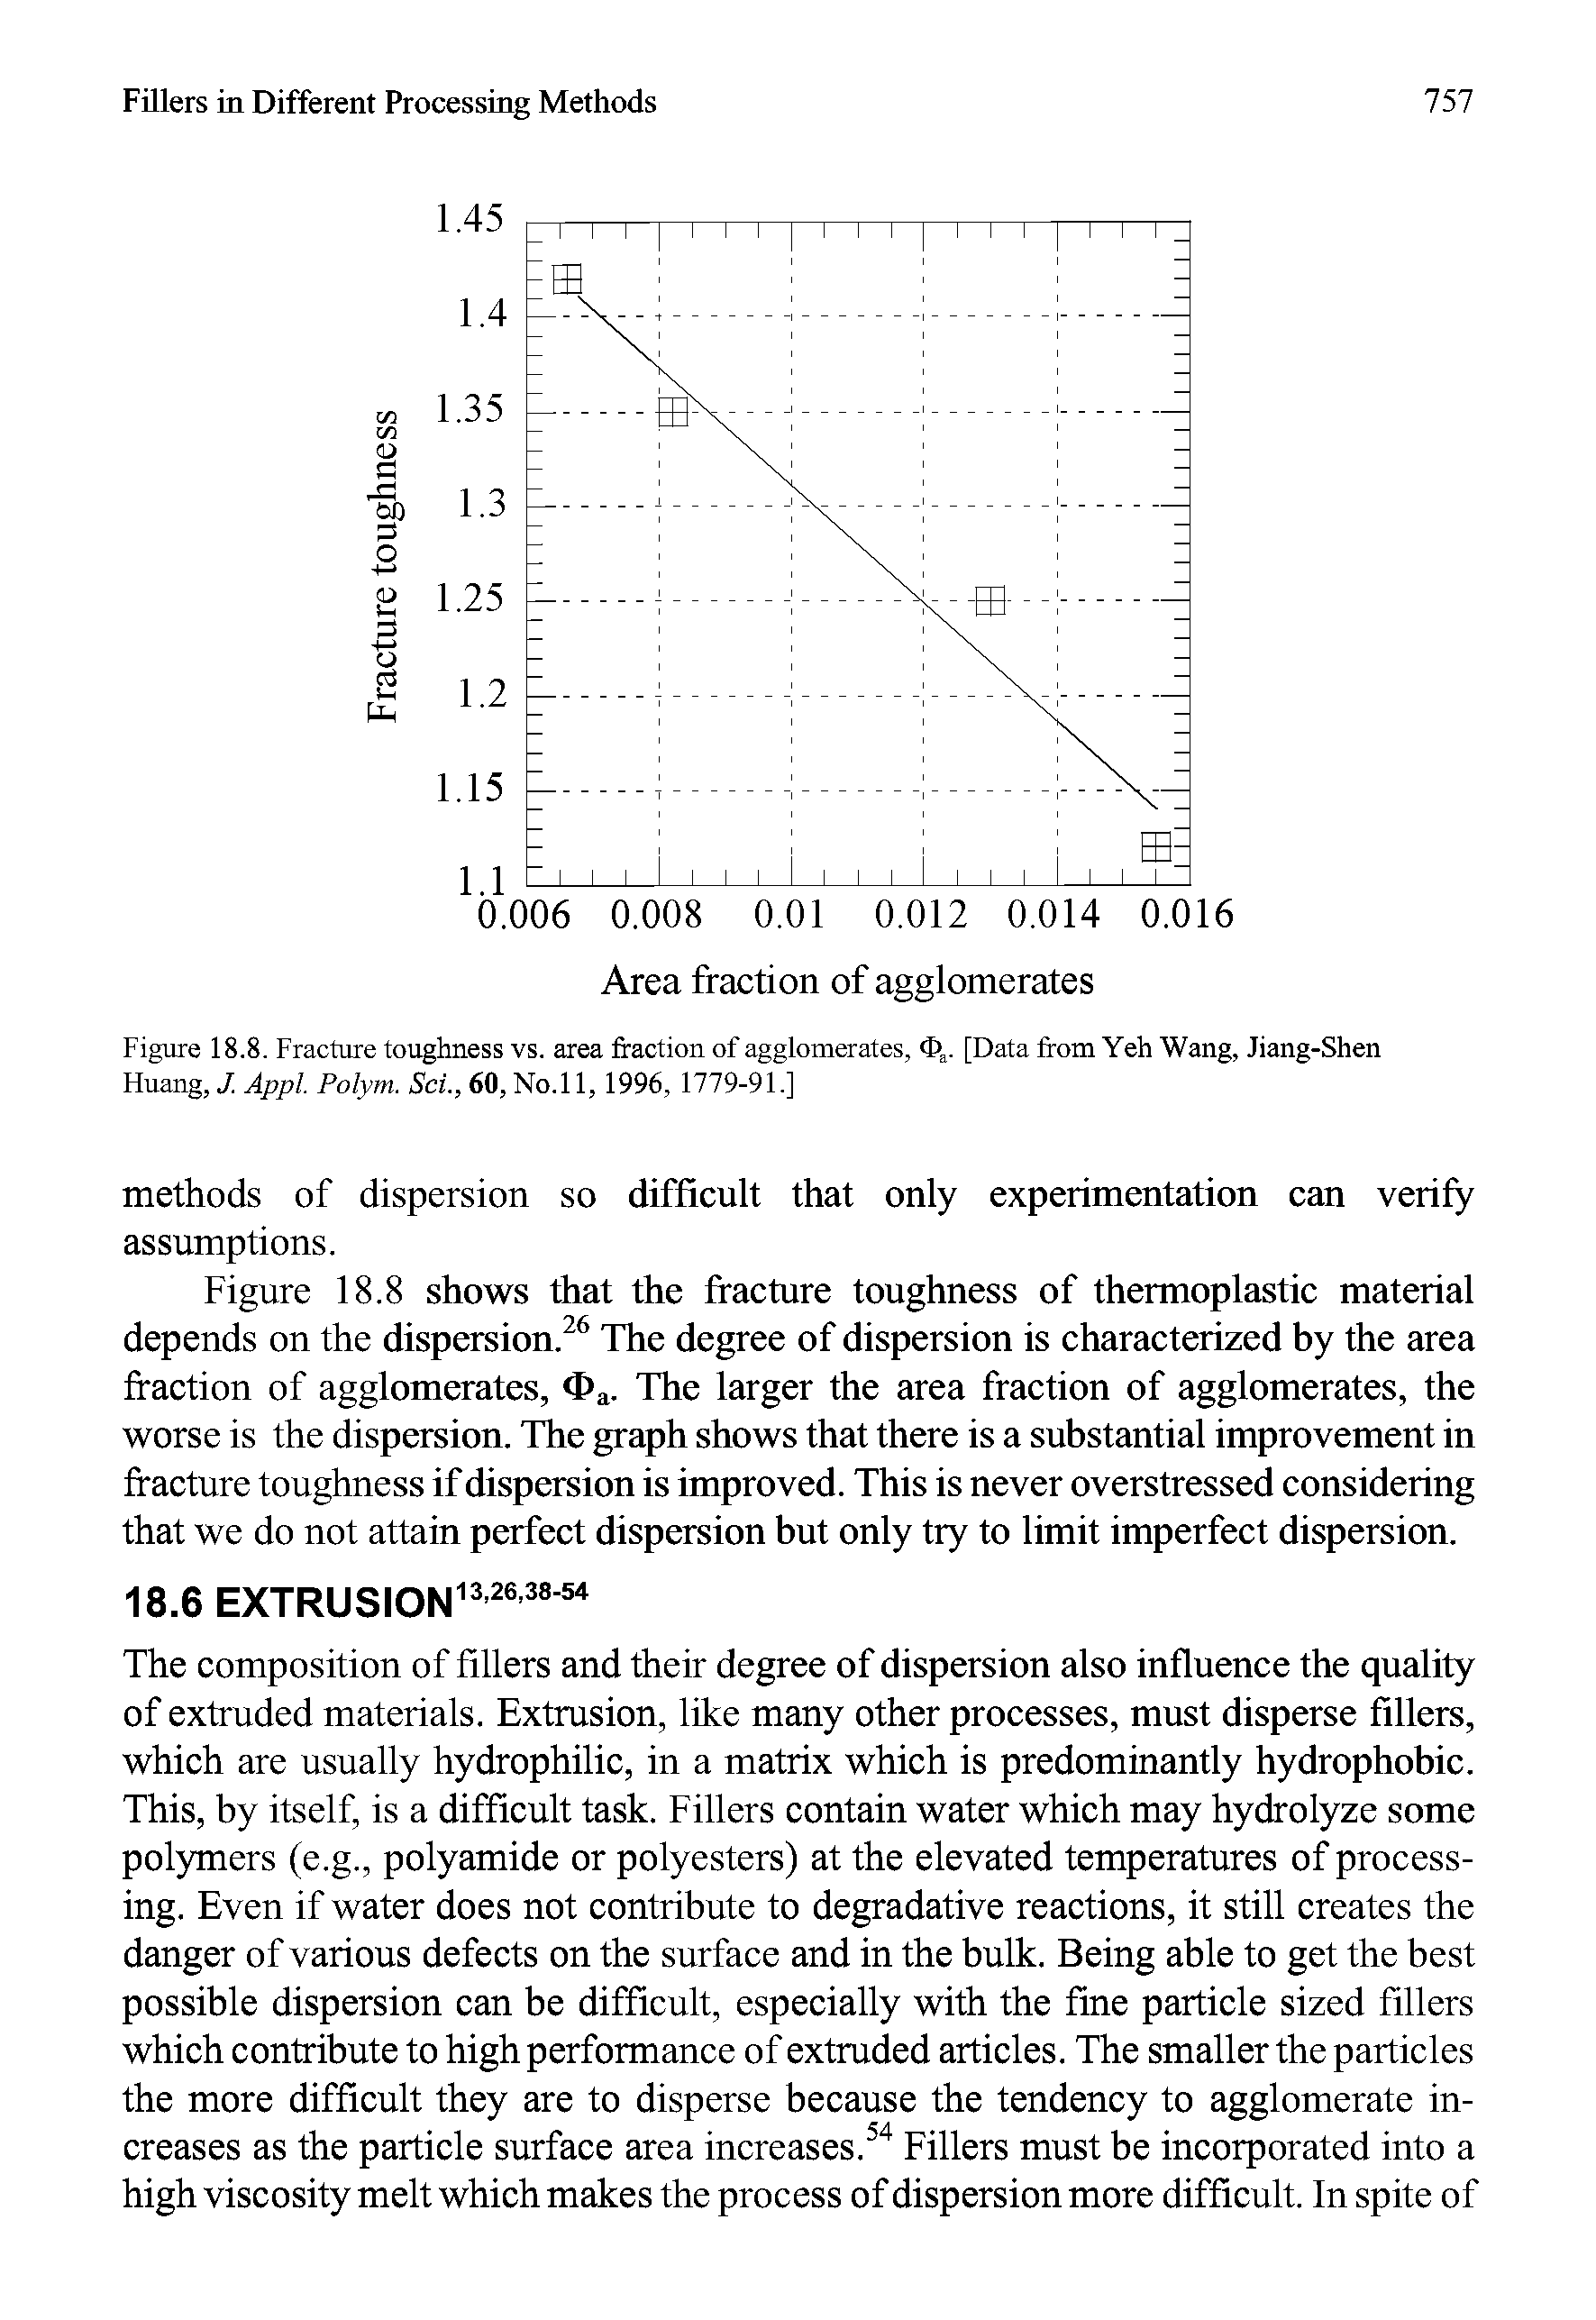 Figure 18.8. I racture toughness vs. area fraction of agglomerates, fit. [Data from Yeh Wang, Jiang-Shen Huang, J. Appl. Polym. Sci., 60, No.l 1, 1996. 1779-91.]...